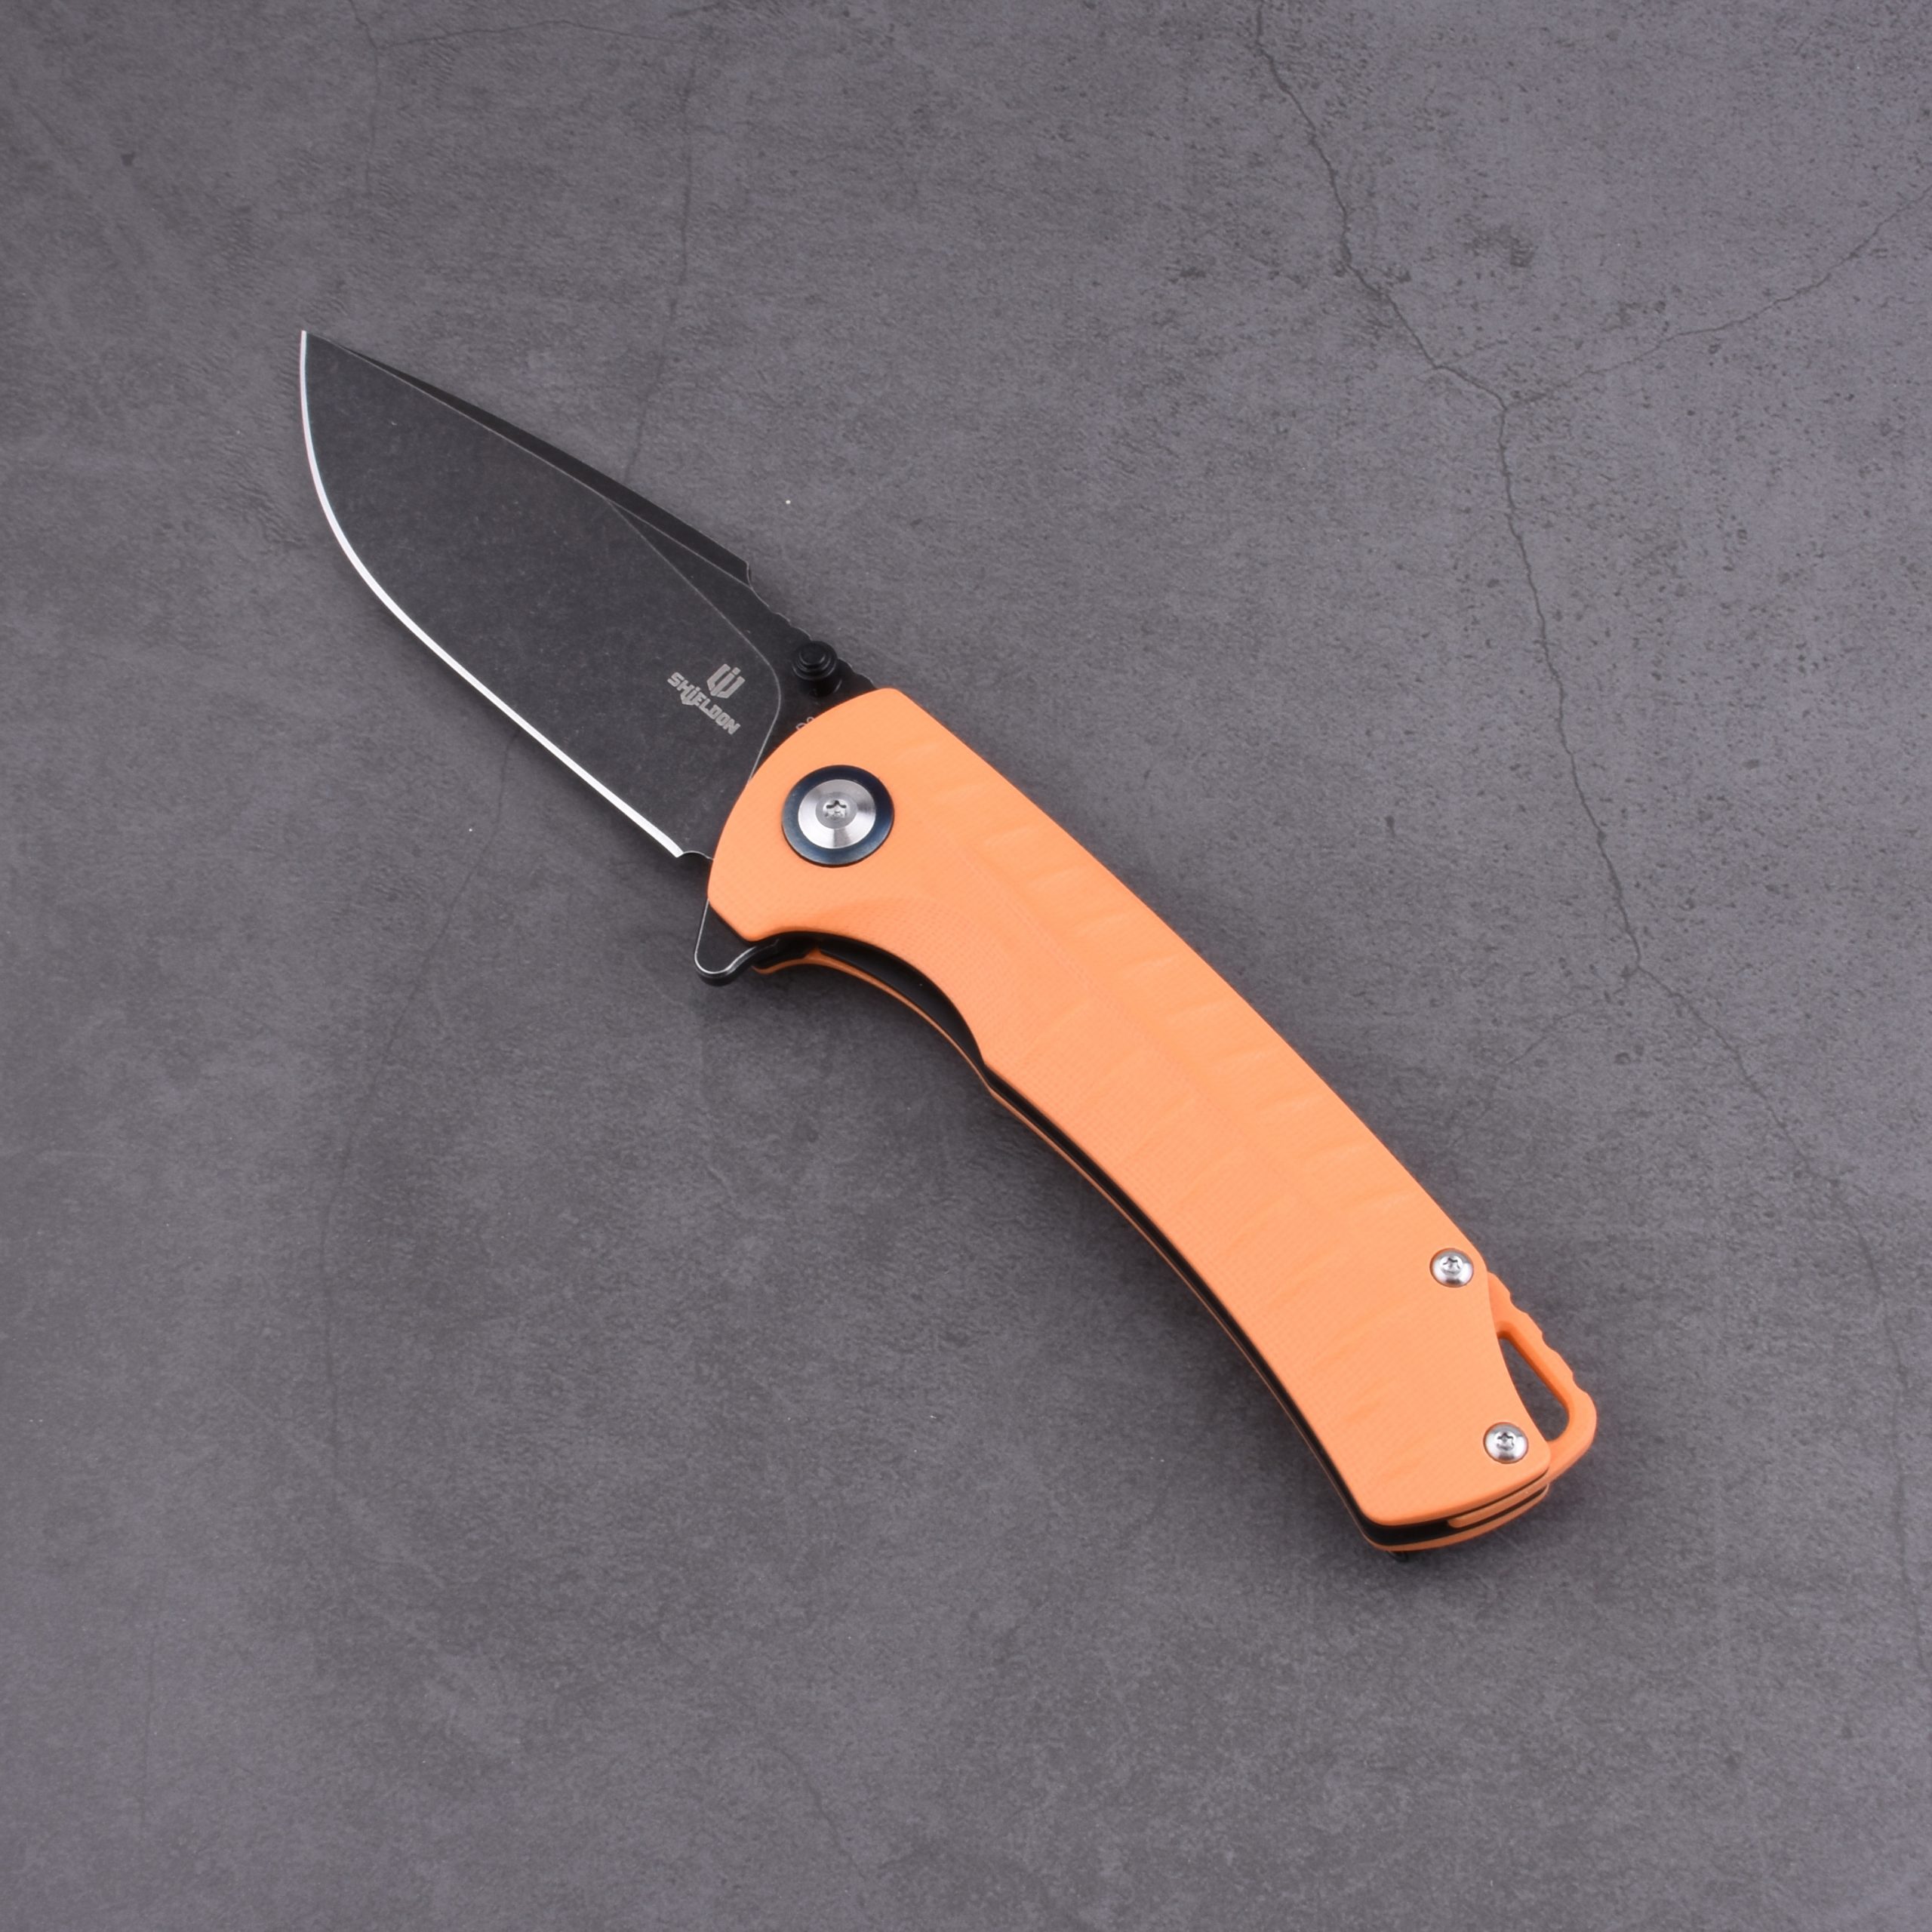 Why You Need to Have Your Own Edc Folding Knife and Which Type of Folding Knife Is Suitable as an EDC Knife?, Shieldon